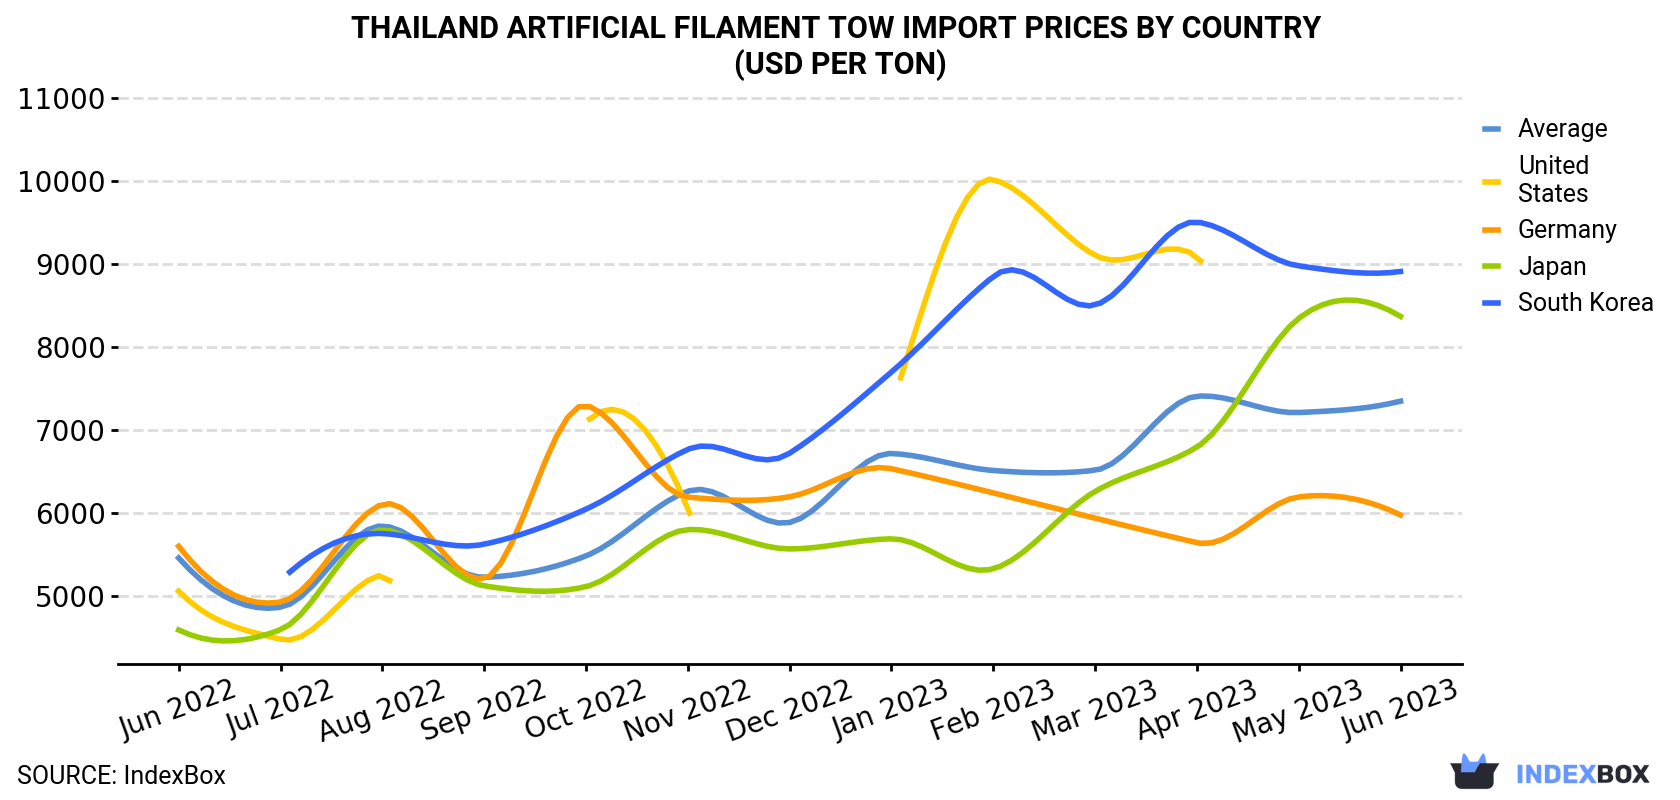 Thailand Artificial Filament Tow Import Prices By Country (USD Per Ton)